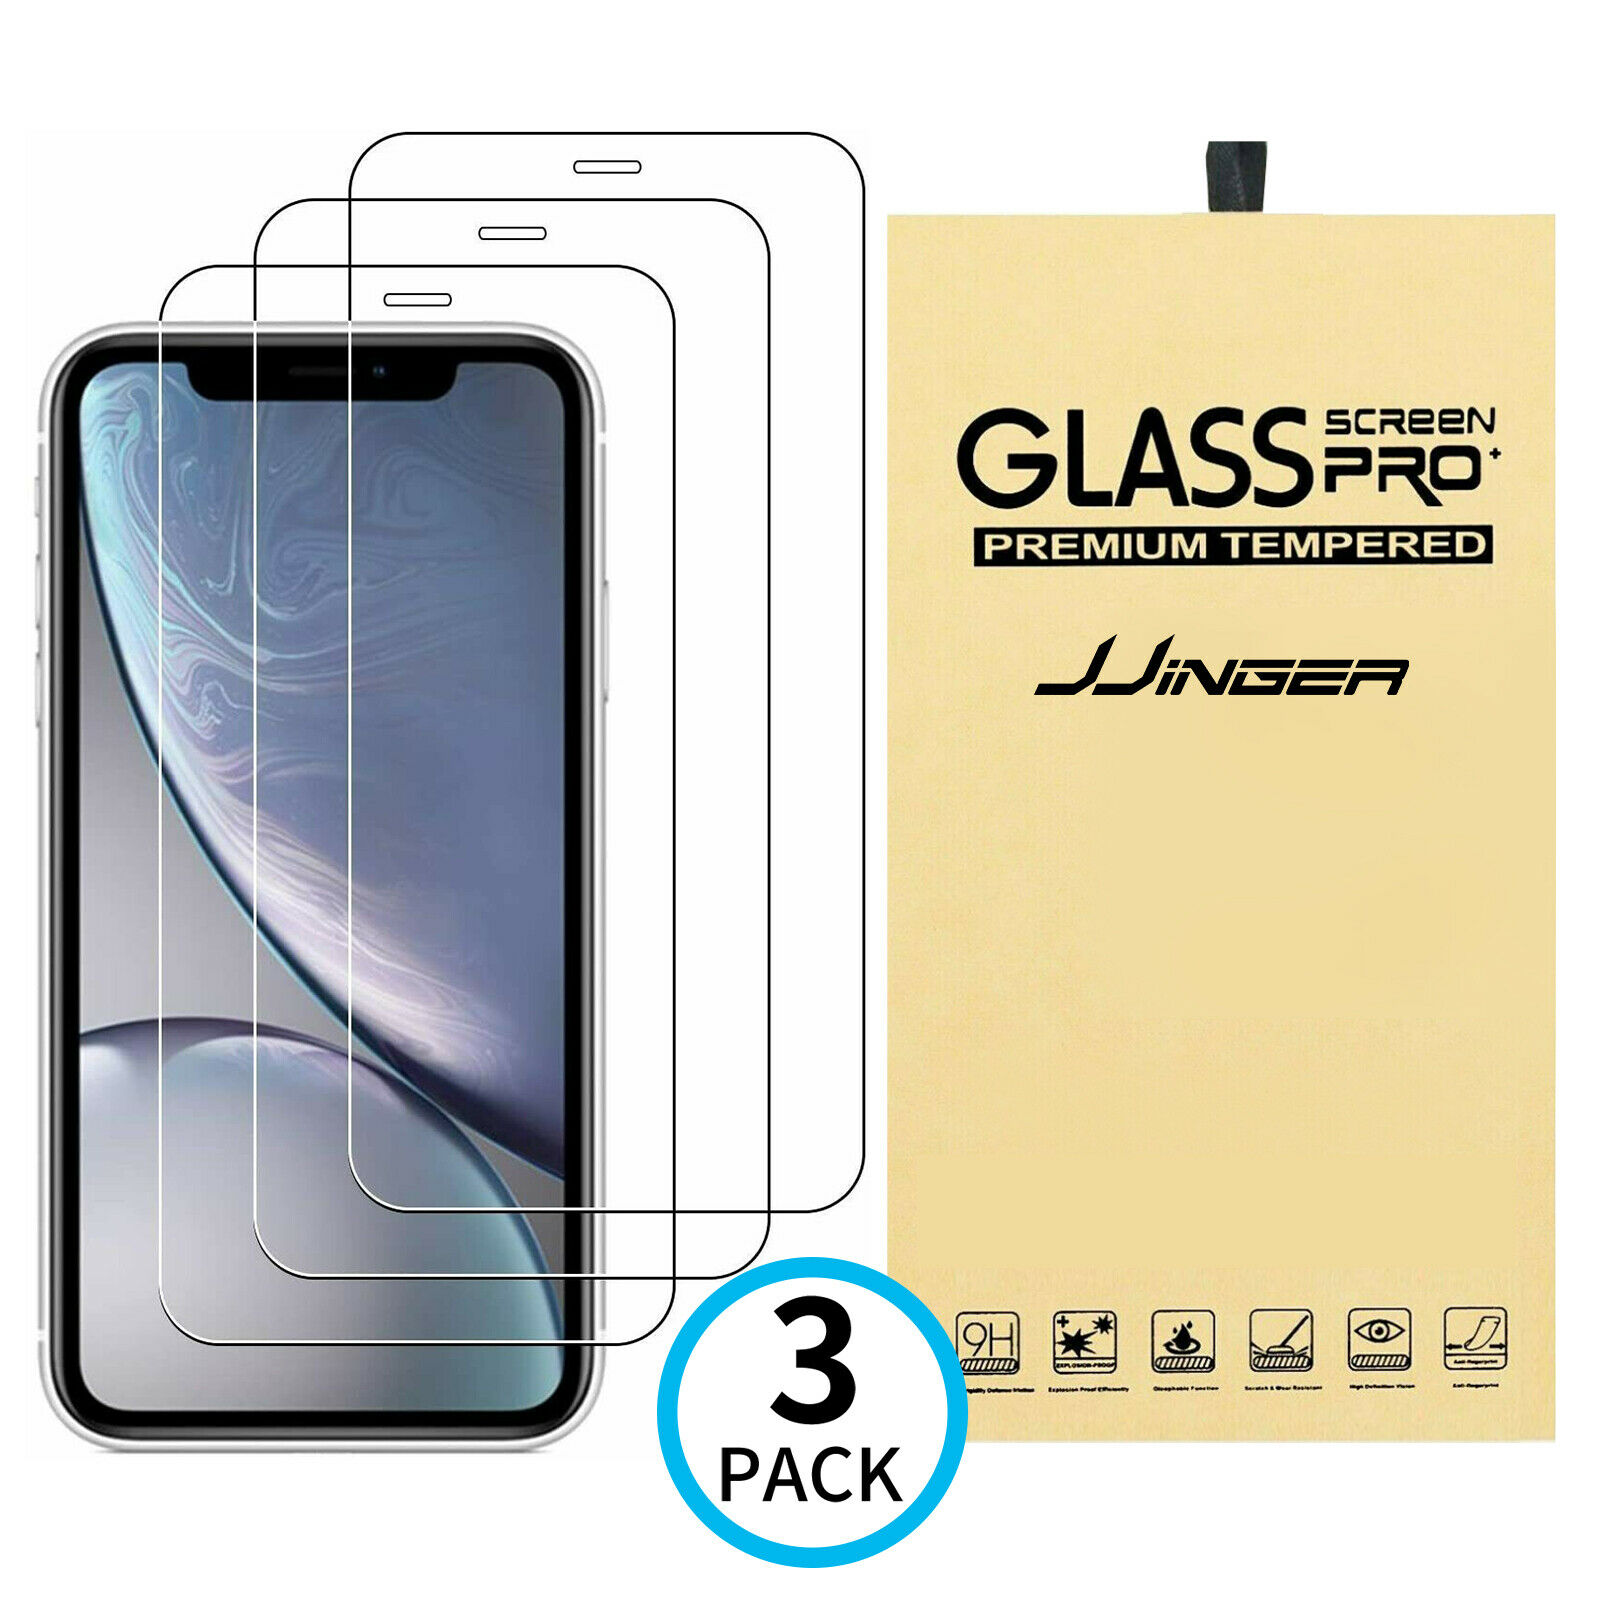 3x Tempered Glass Screen Protector Cover For Iphone 12 11 Pro Max X Xs Xr 8 7 6